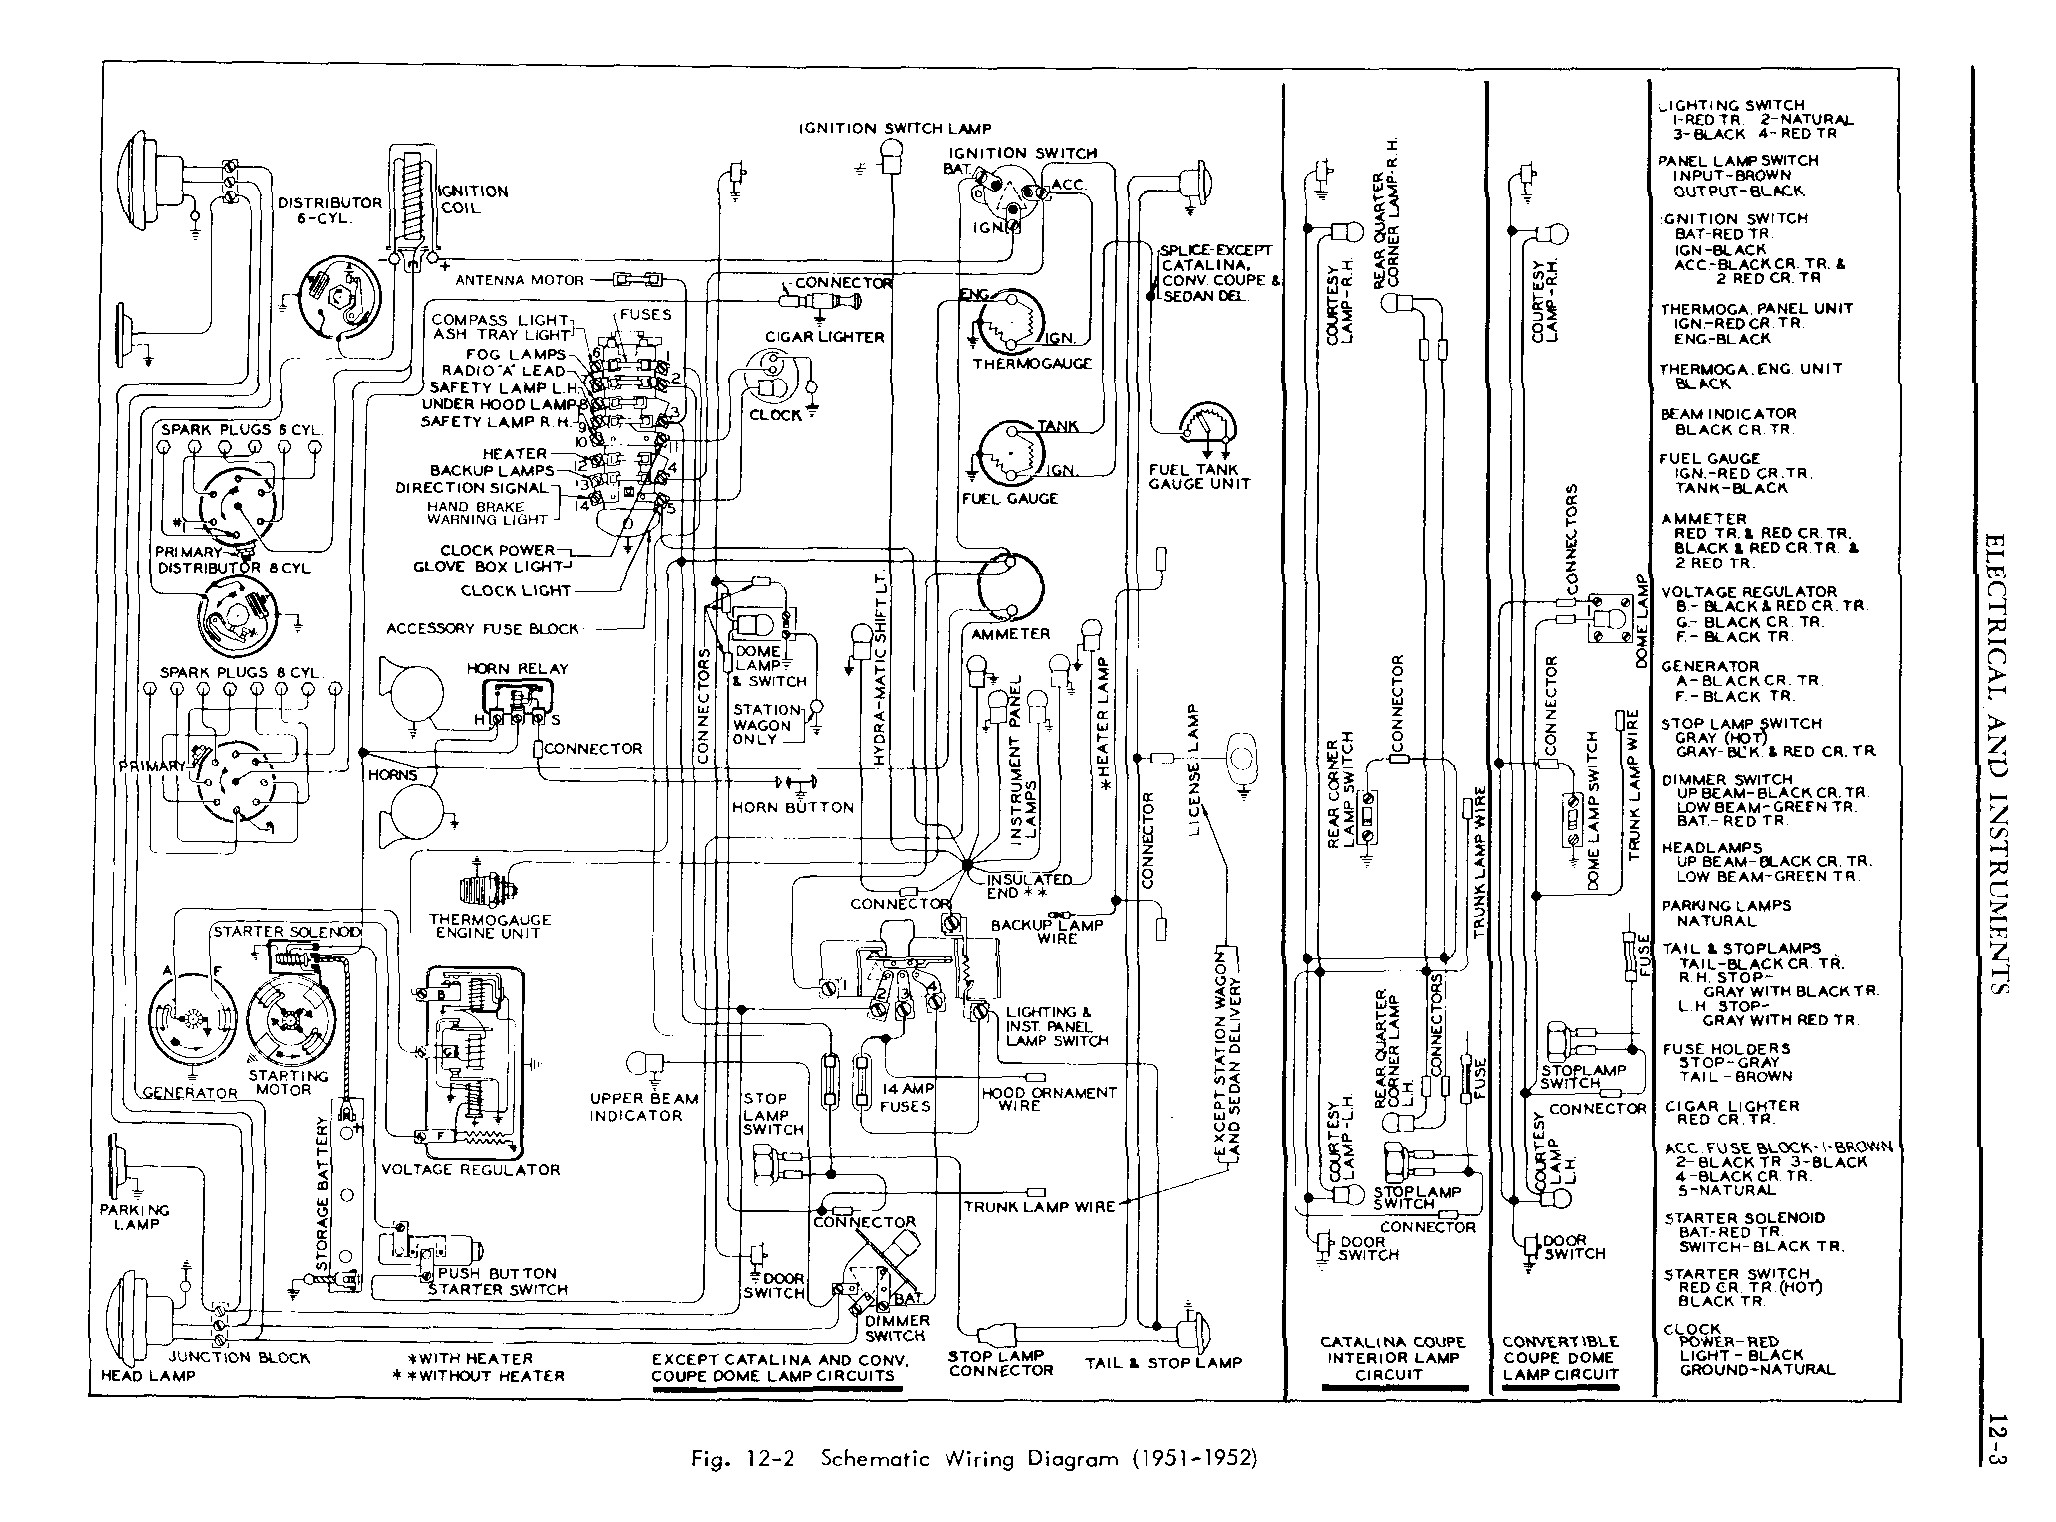 1949 Pontiac Shop Manual- Electrical and Instruments Page 3 of 54